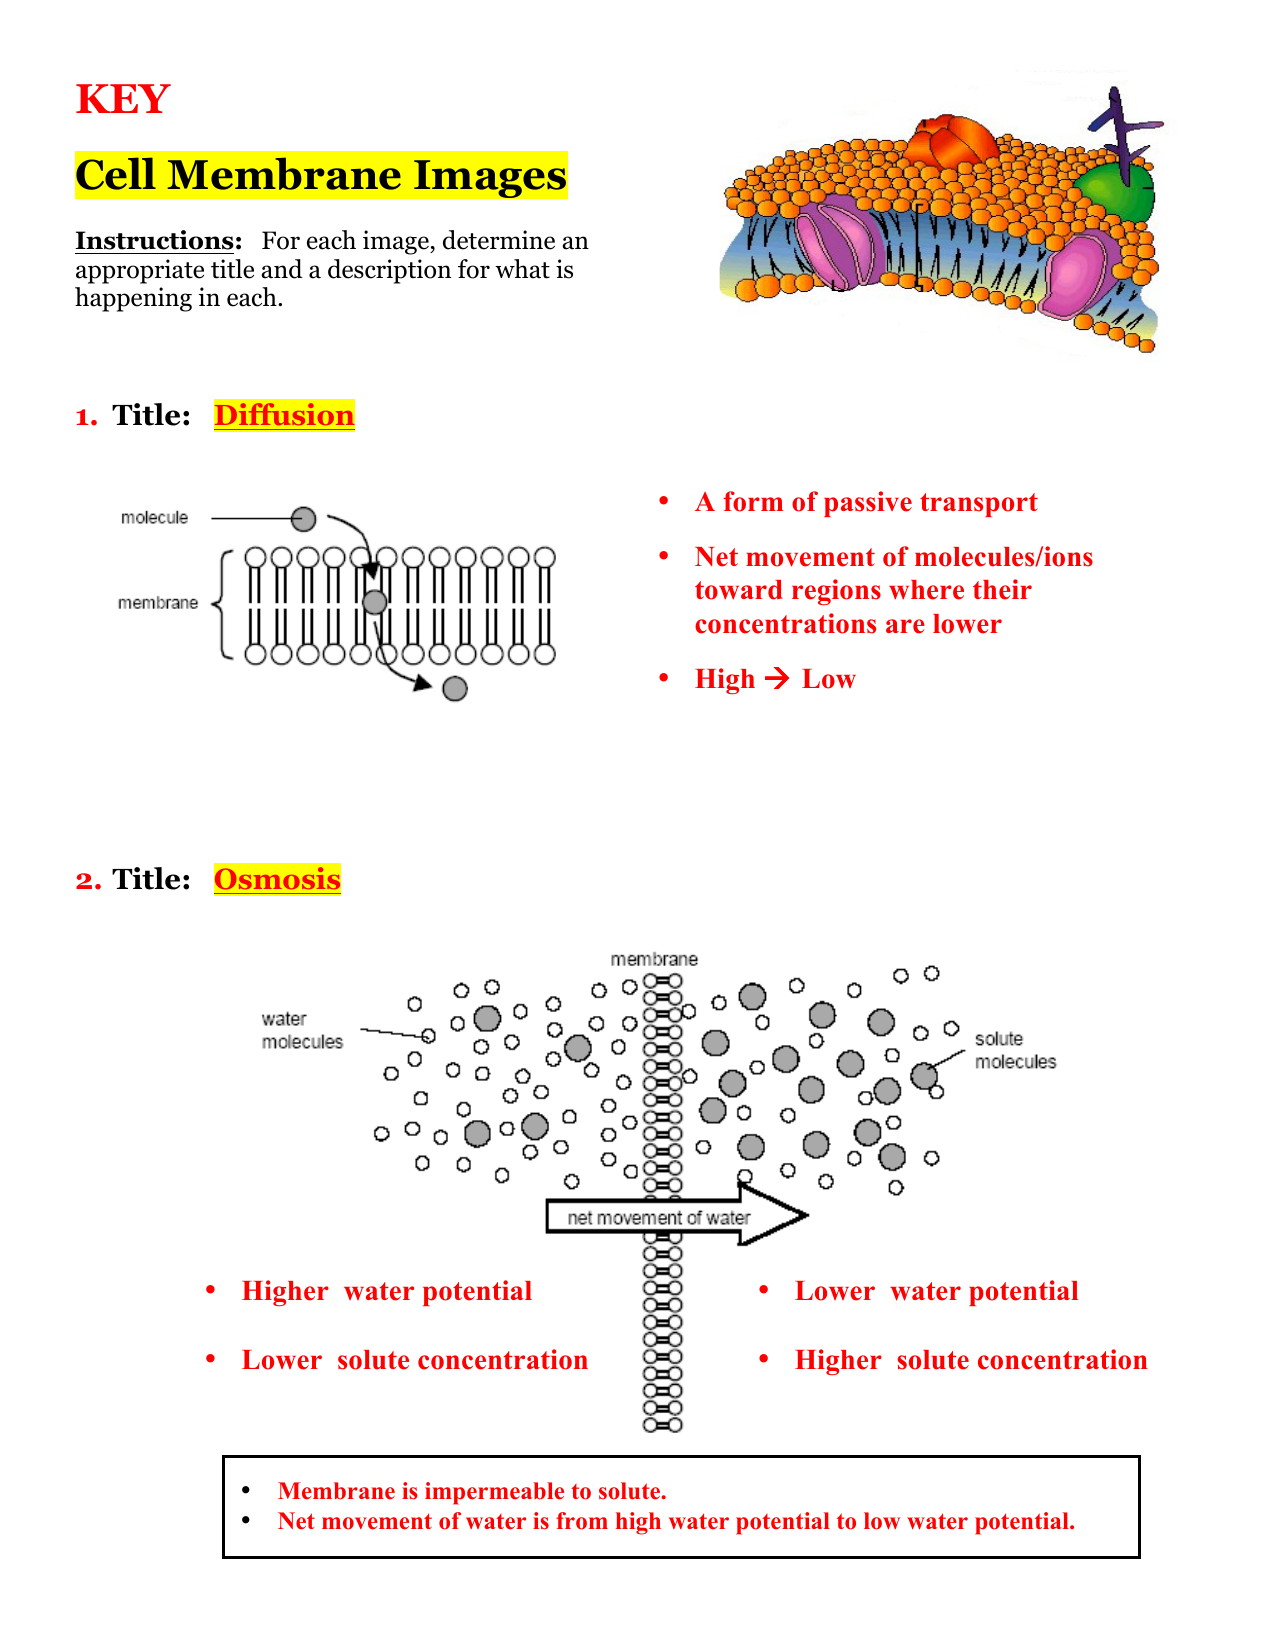 KEY Cell Membrane Images With Cell Membrane Images Worksheet Answers